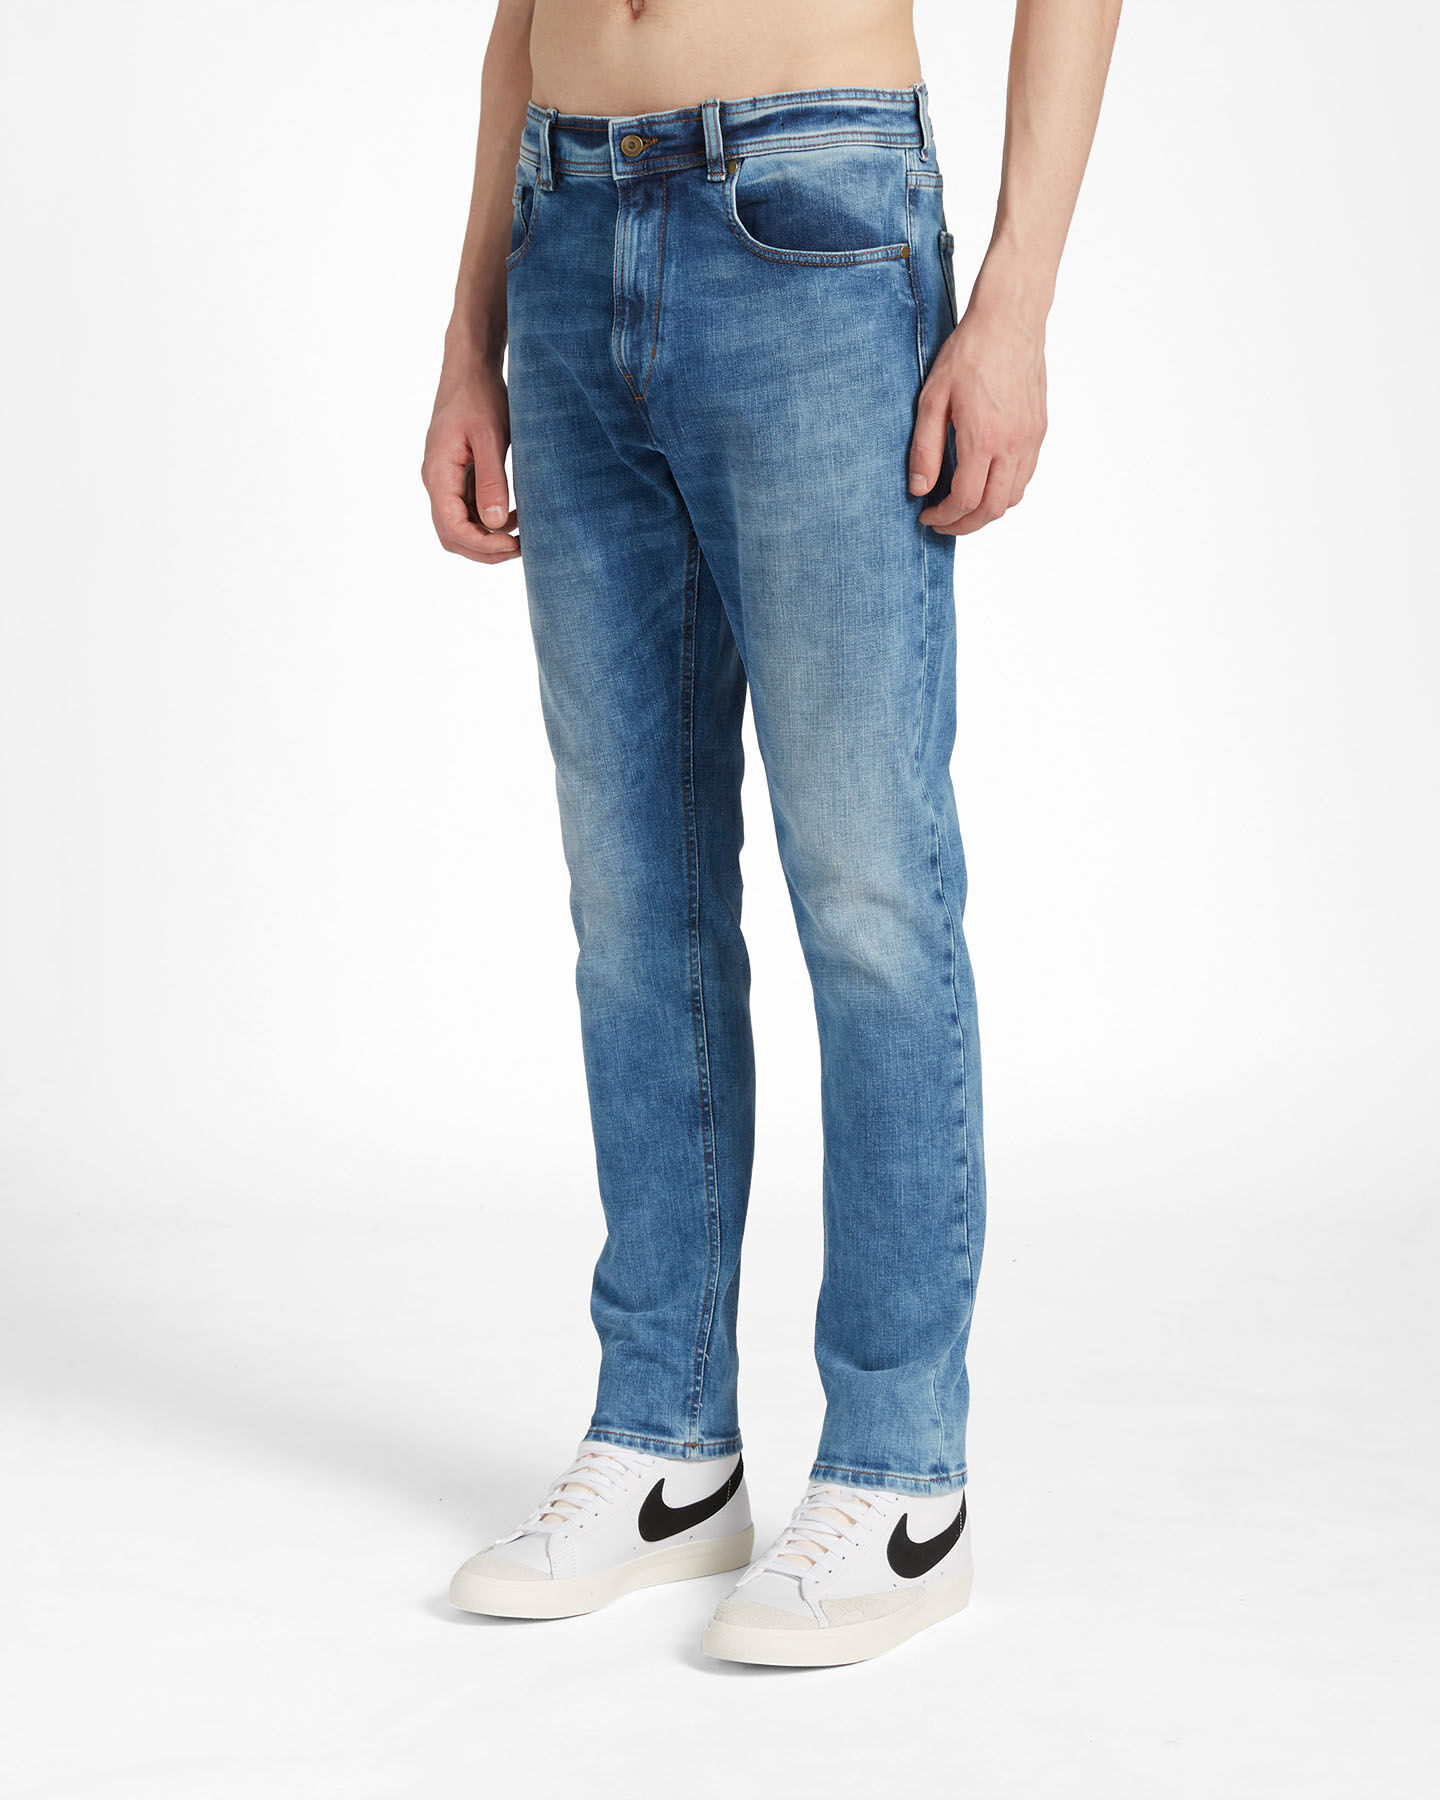  Jeans BEAR SURFER CONCEPT M S4122064|MD|44 scatto 2